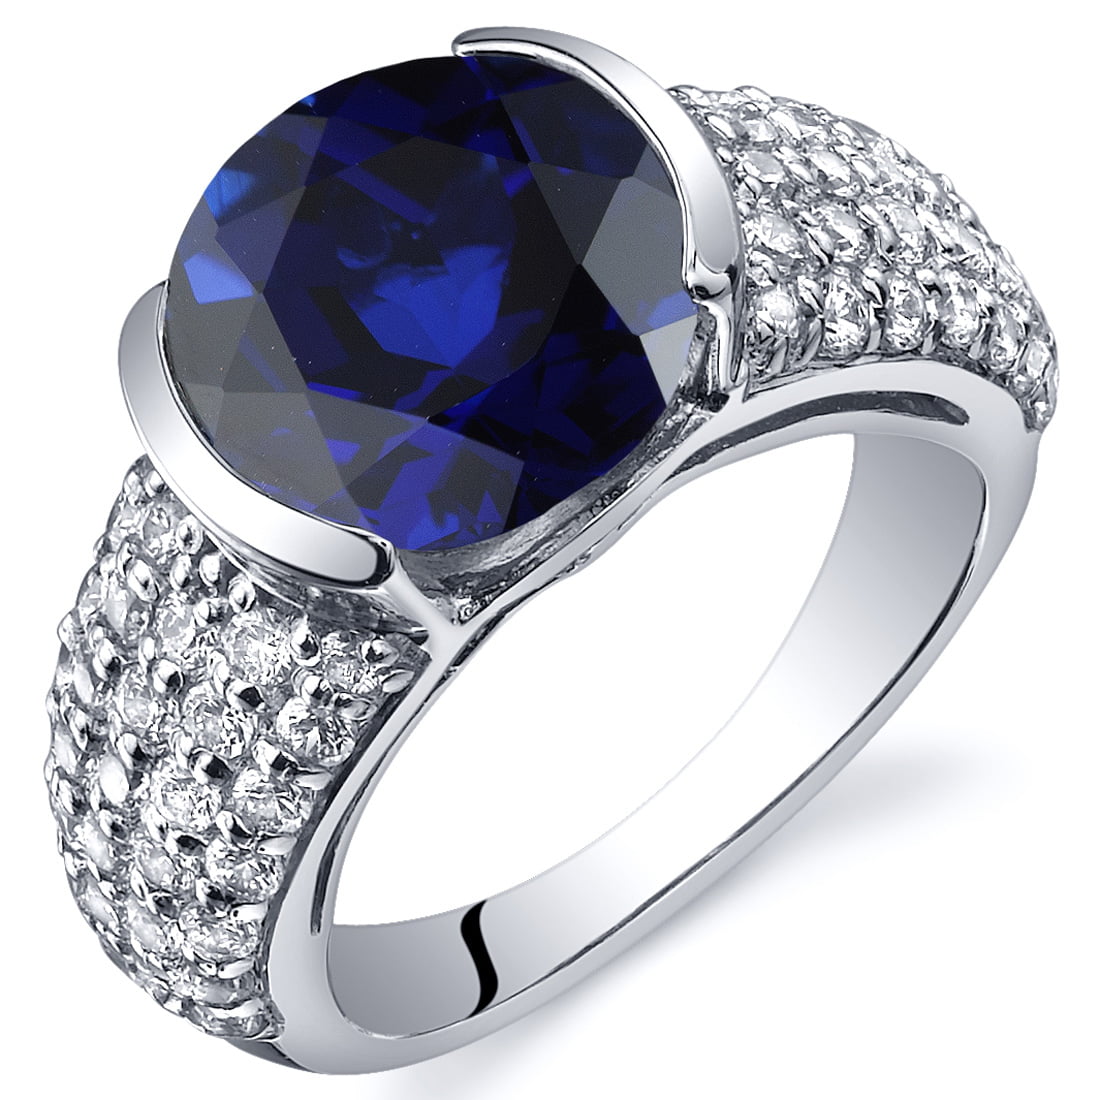 Blue Sapphire CZ Round Bezel Halo Ring New .925 Sterling Silver Band Sizes 5-12 